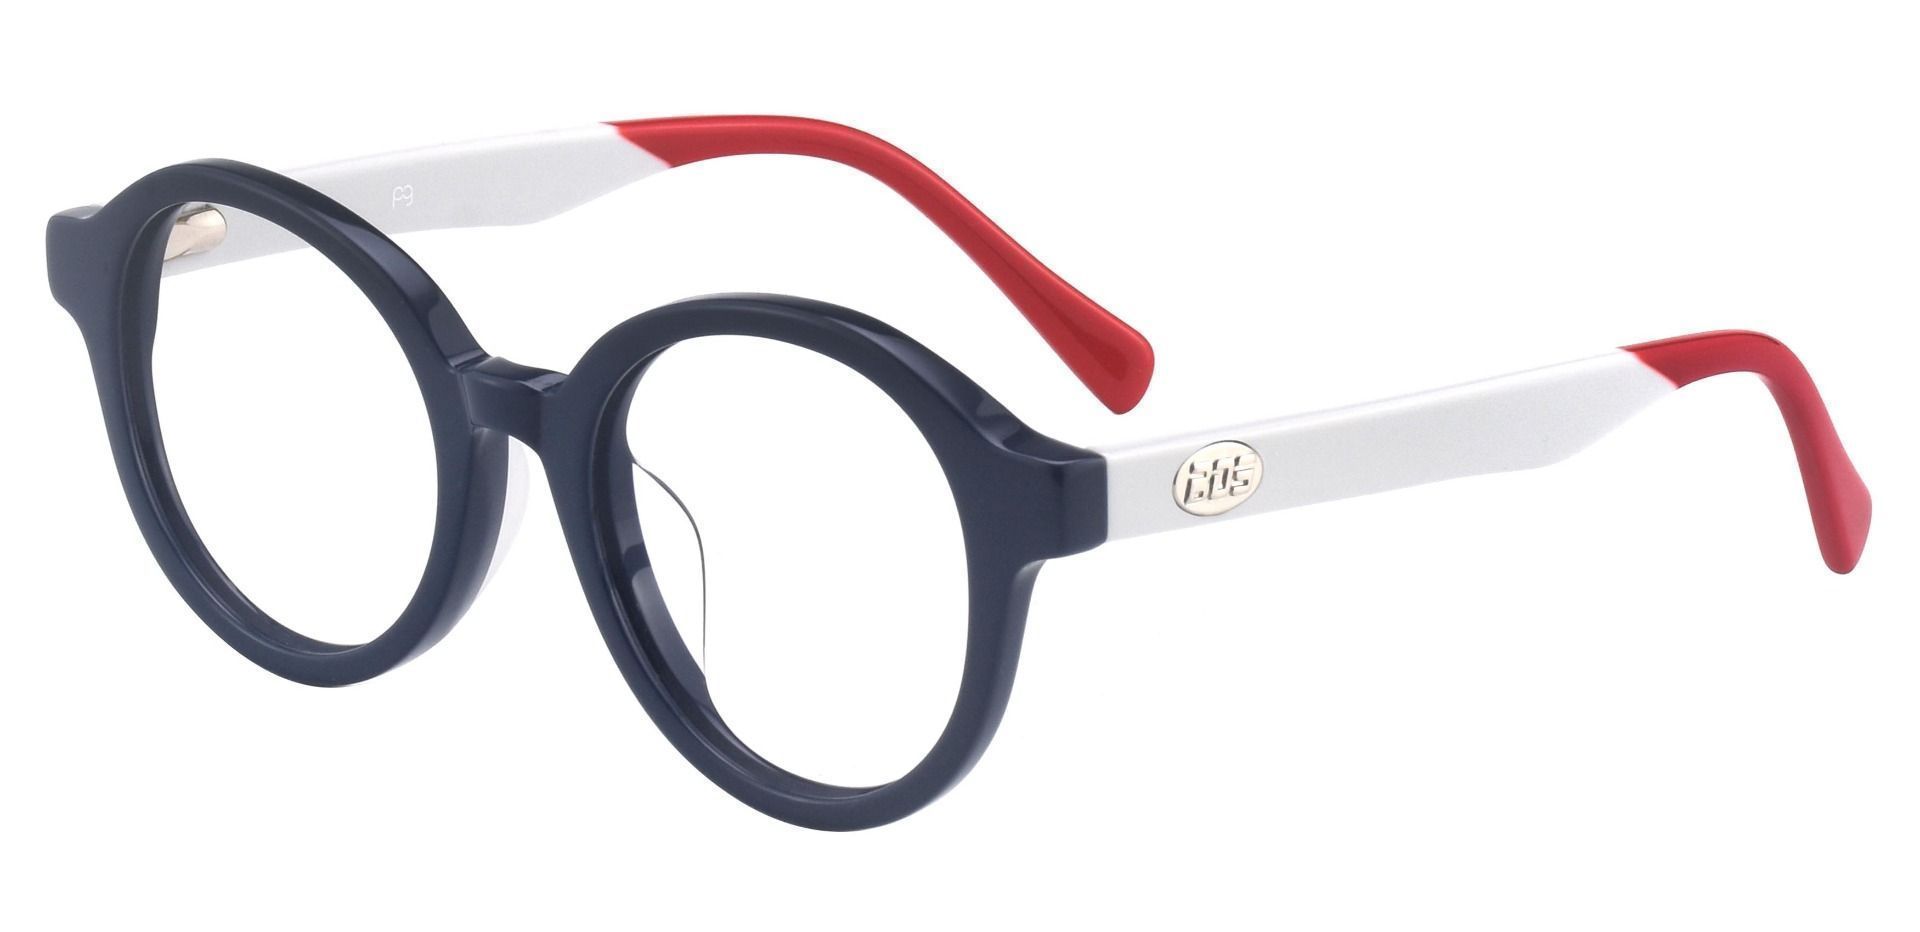 Roxbury Round Non-Rx Glasses - The Frame Is Blue And Red